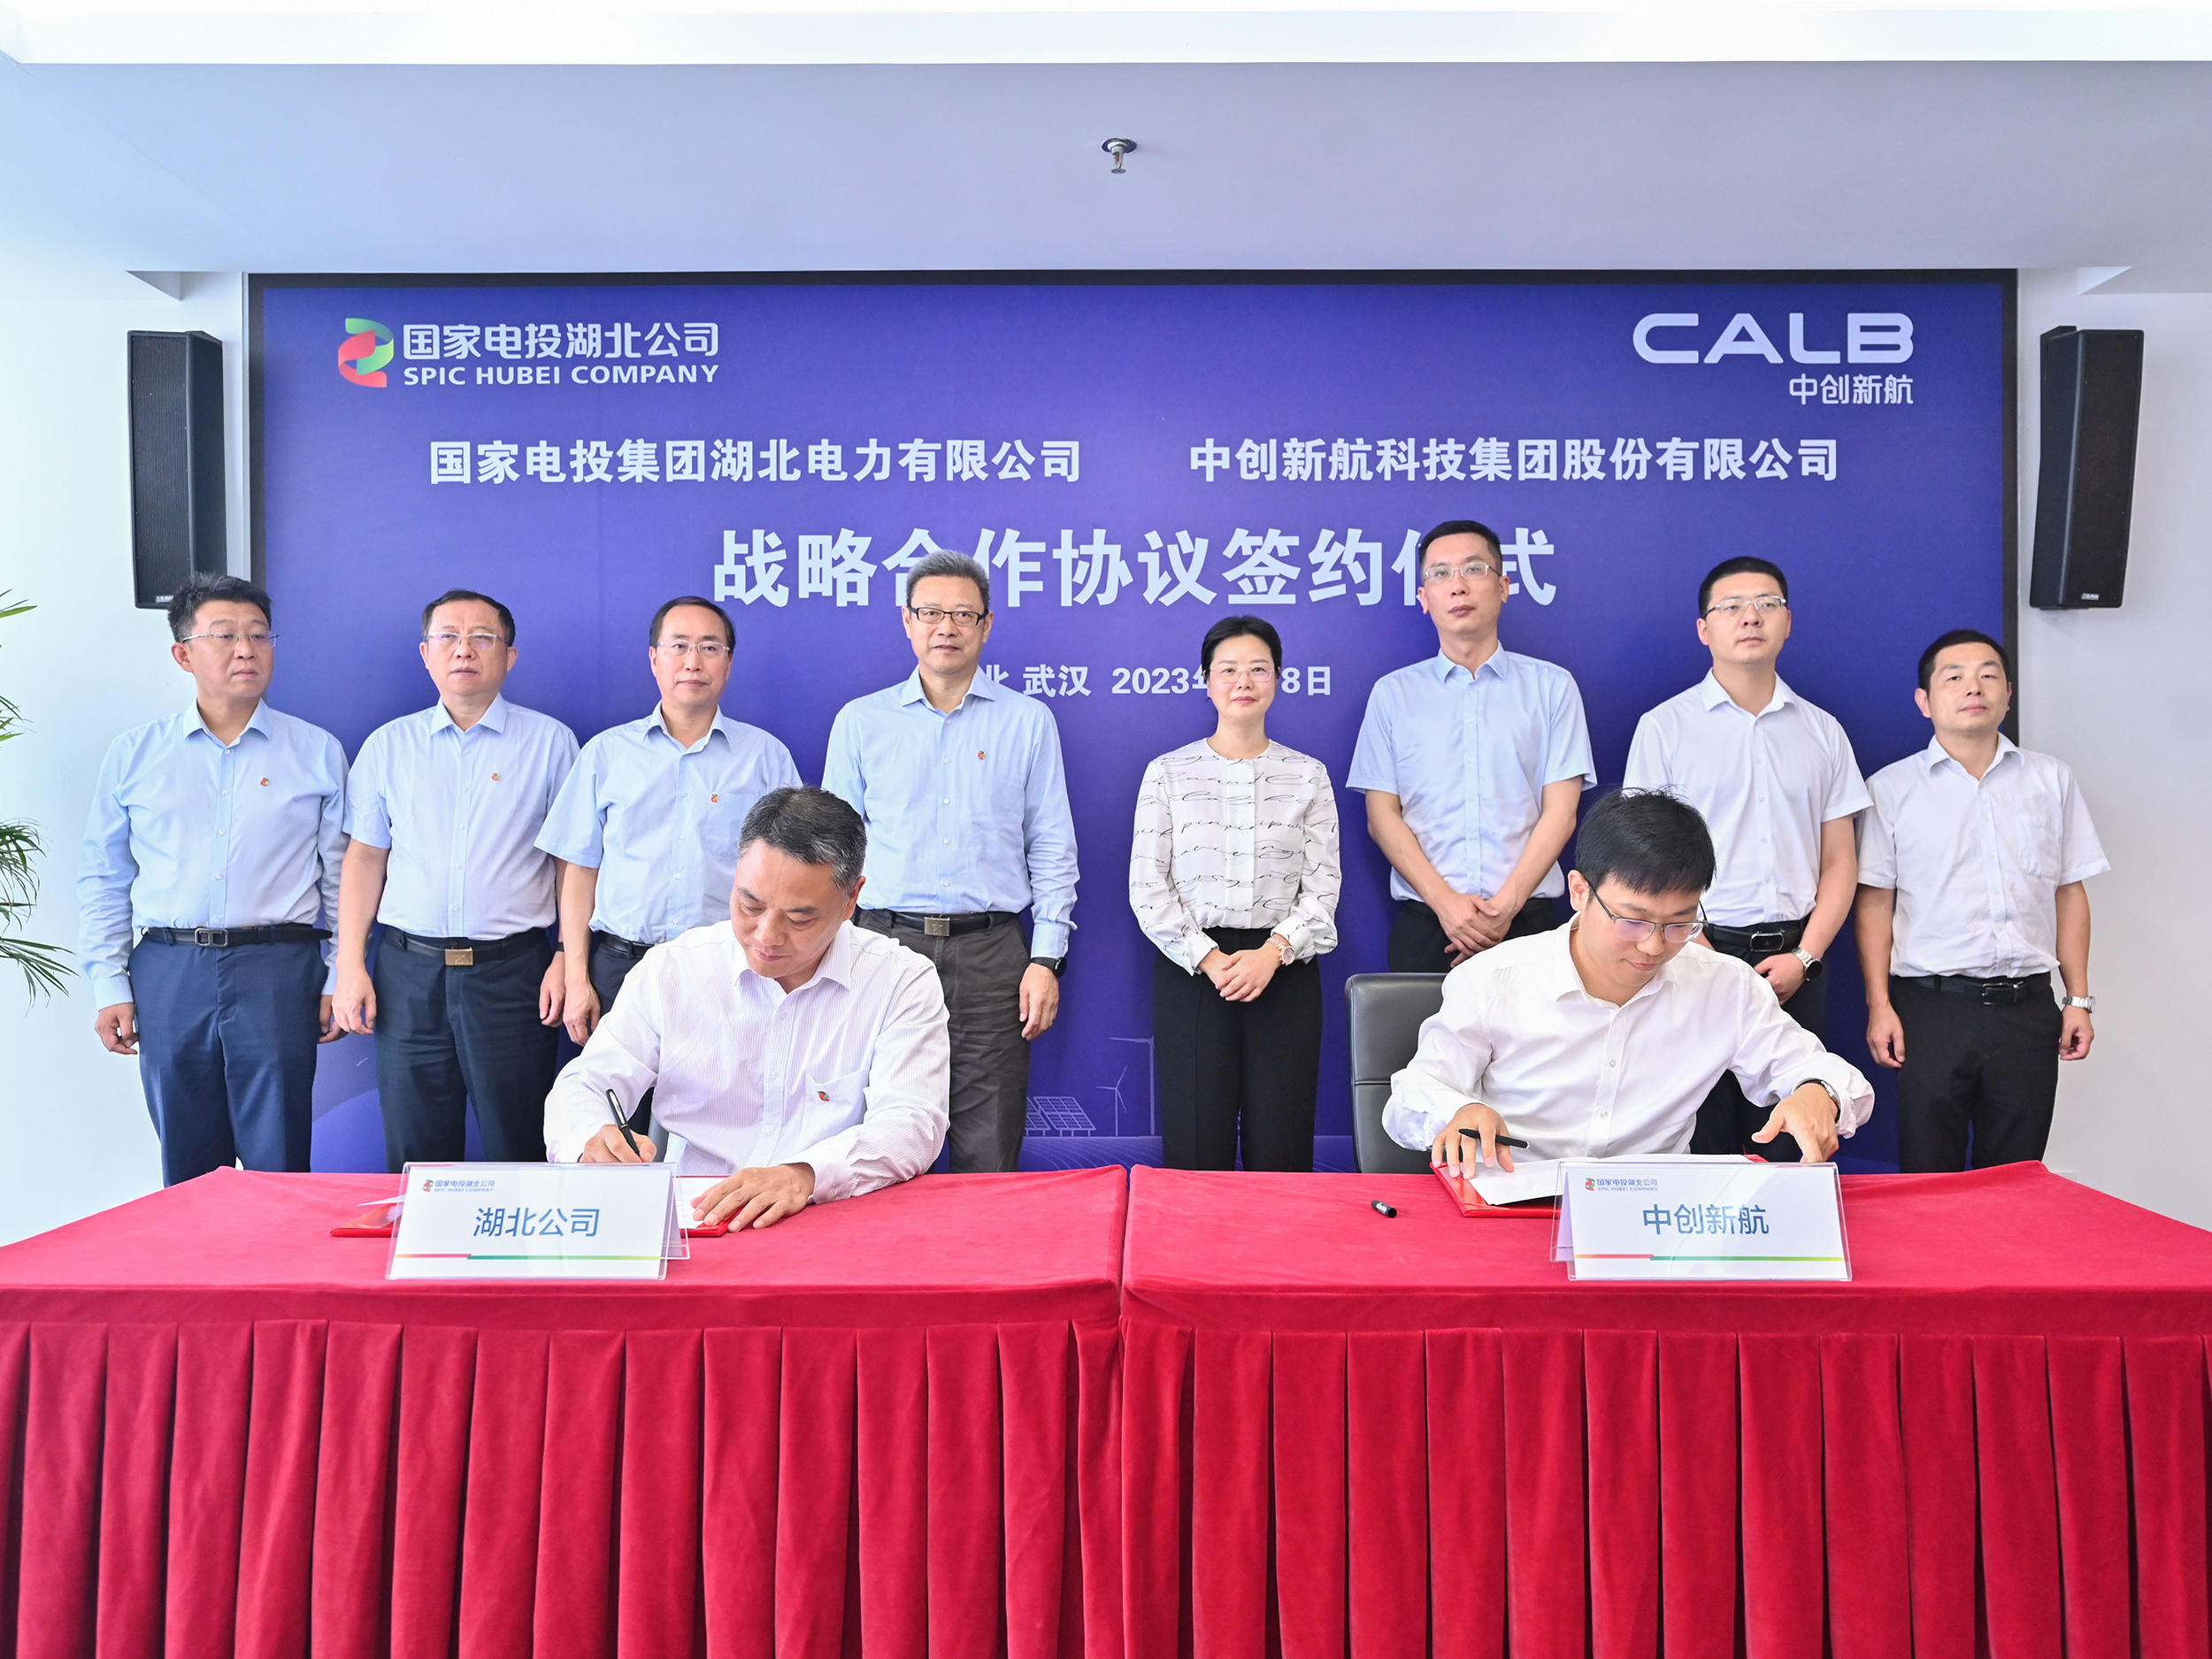 CALB Signed a Strategic Cooperation Agreement with SPIC